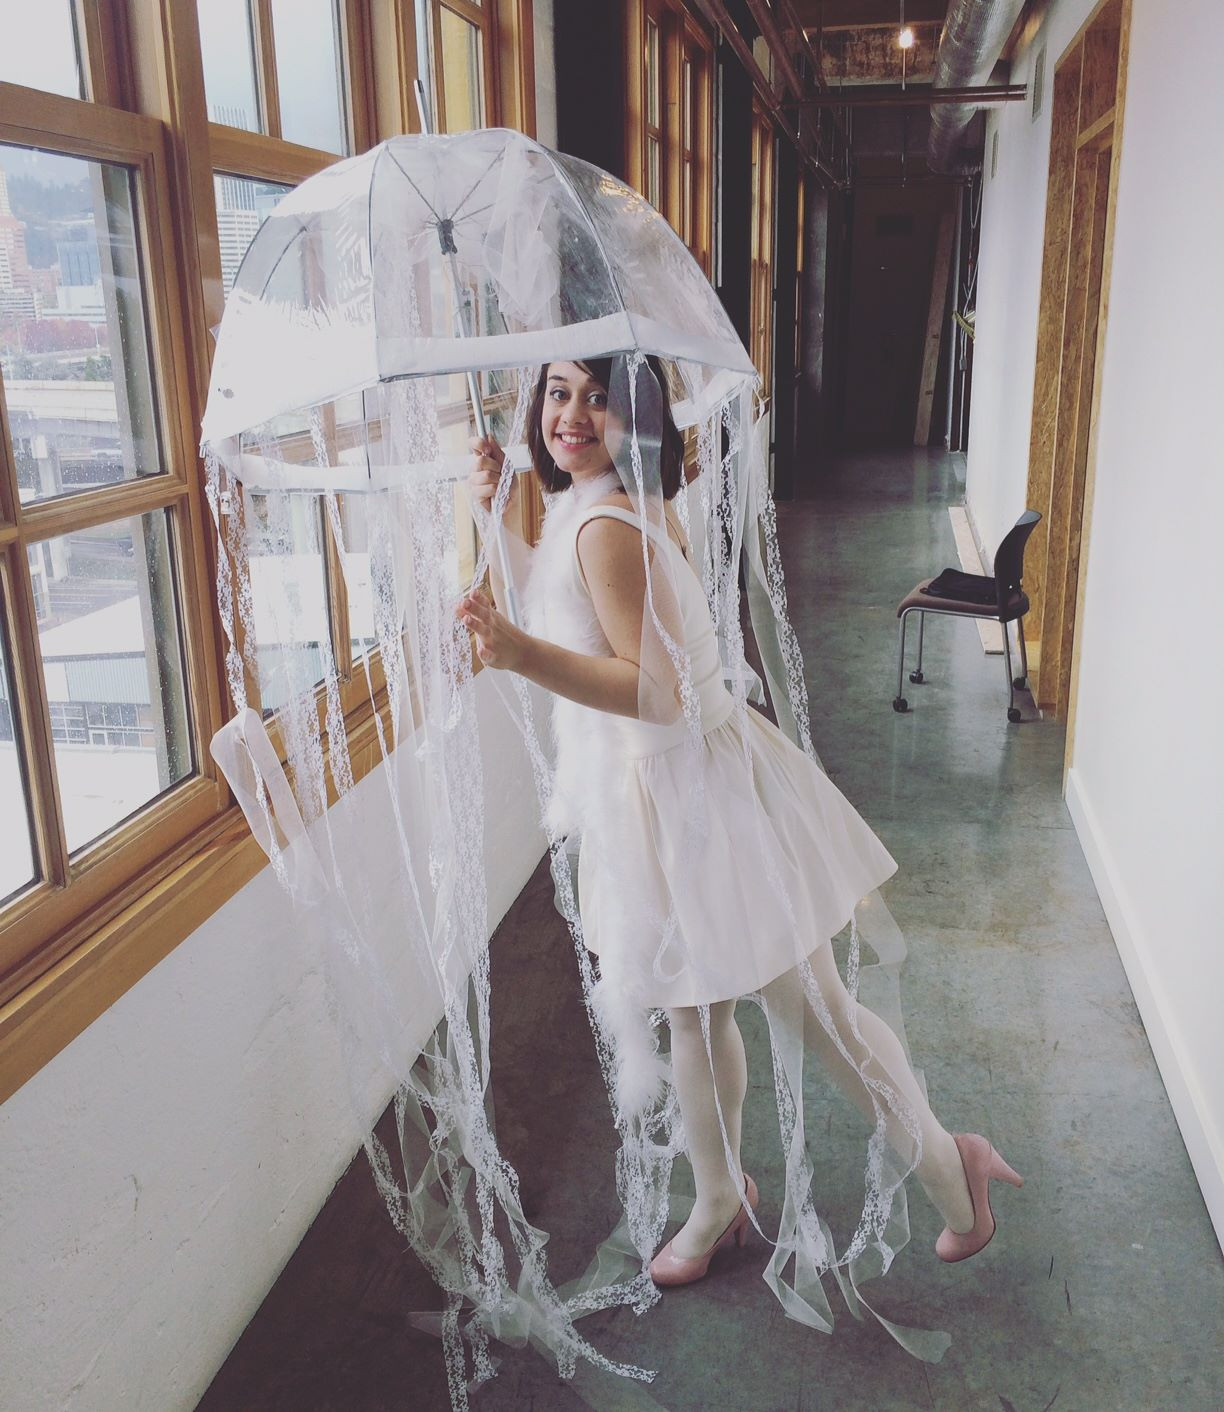 DIY Jellyfish Costumes
 LINDSTYLEFILES How to Make a Jellyfish Costume in 6 Steps